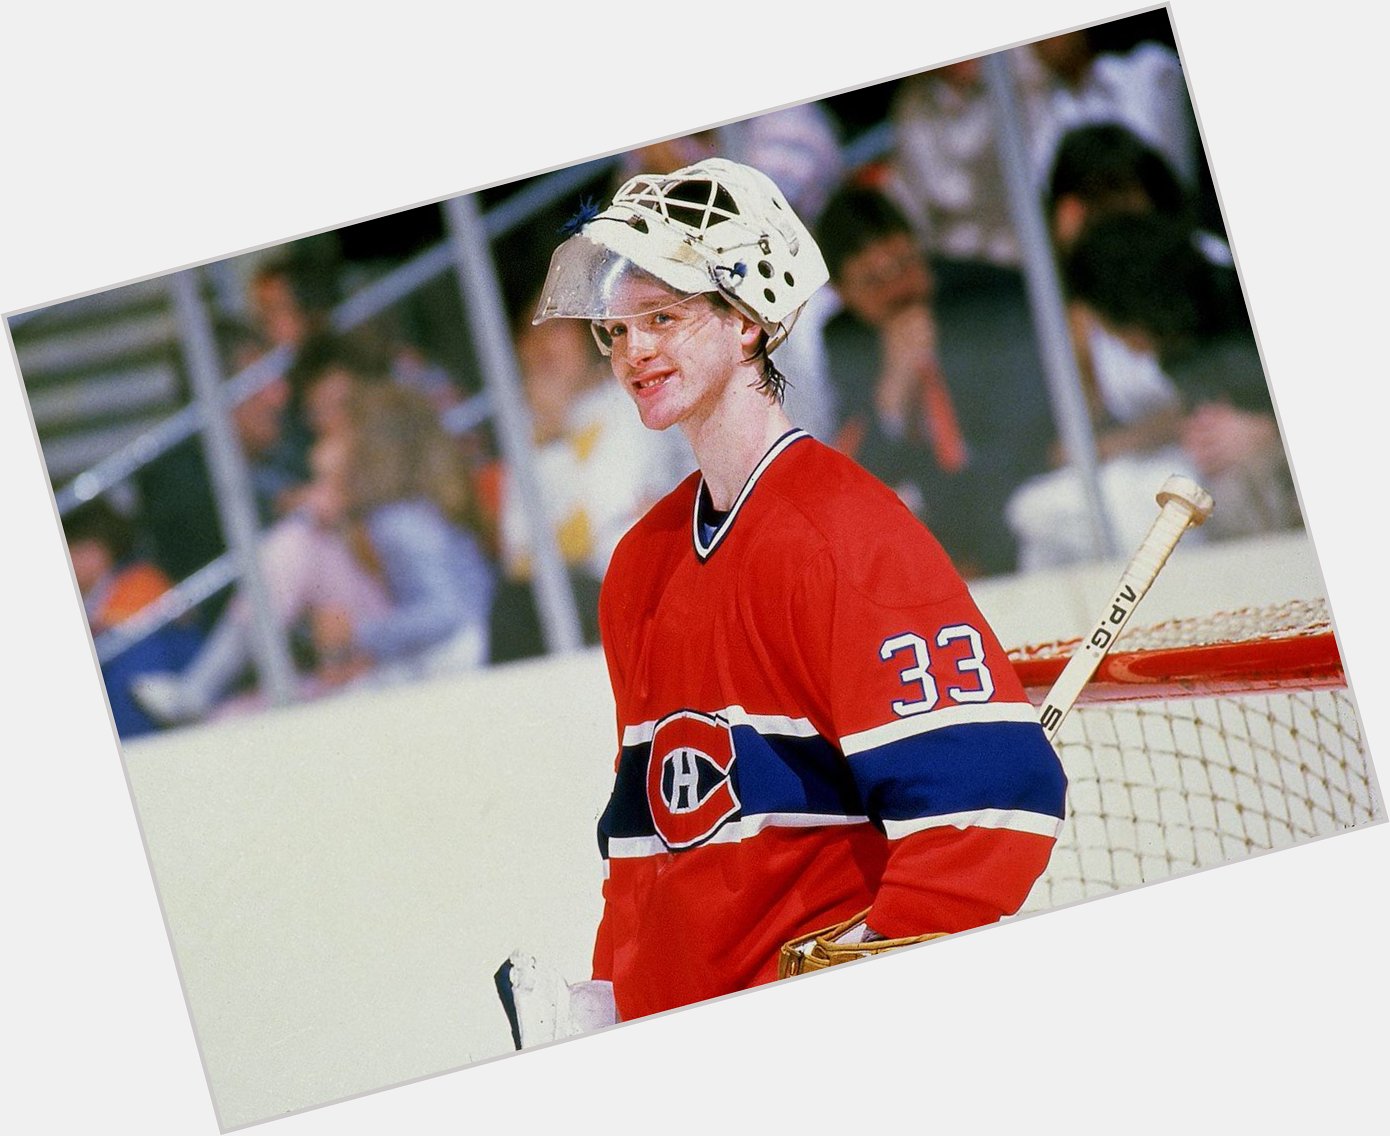 Happy Birthday, 
Shout out to Best Goalie ever, Patrick Roy! 